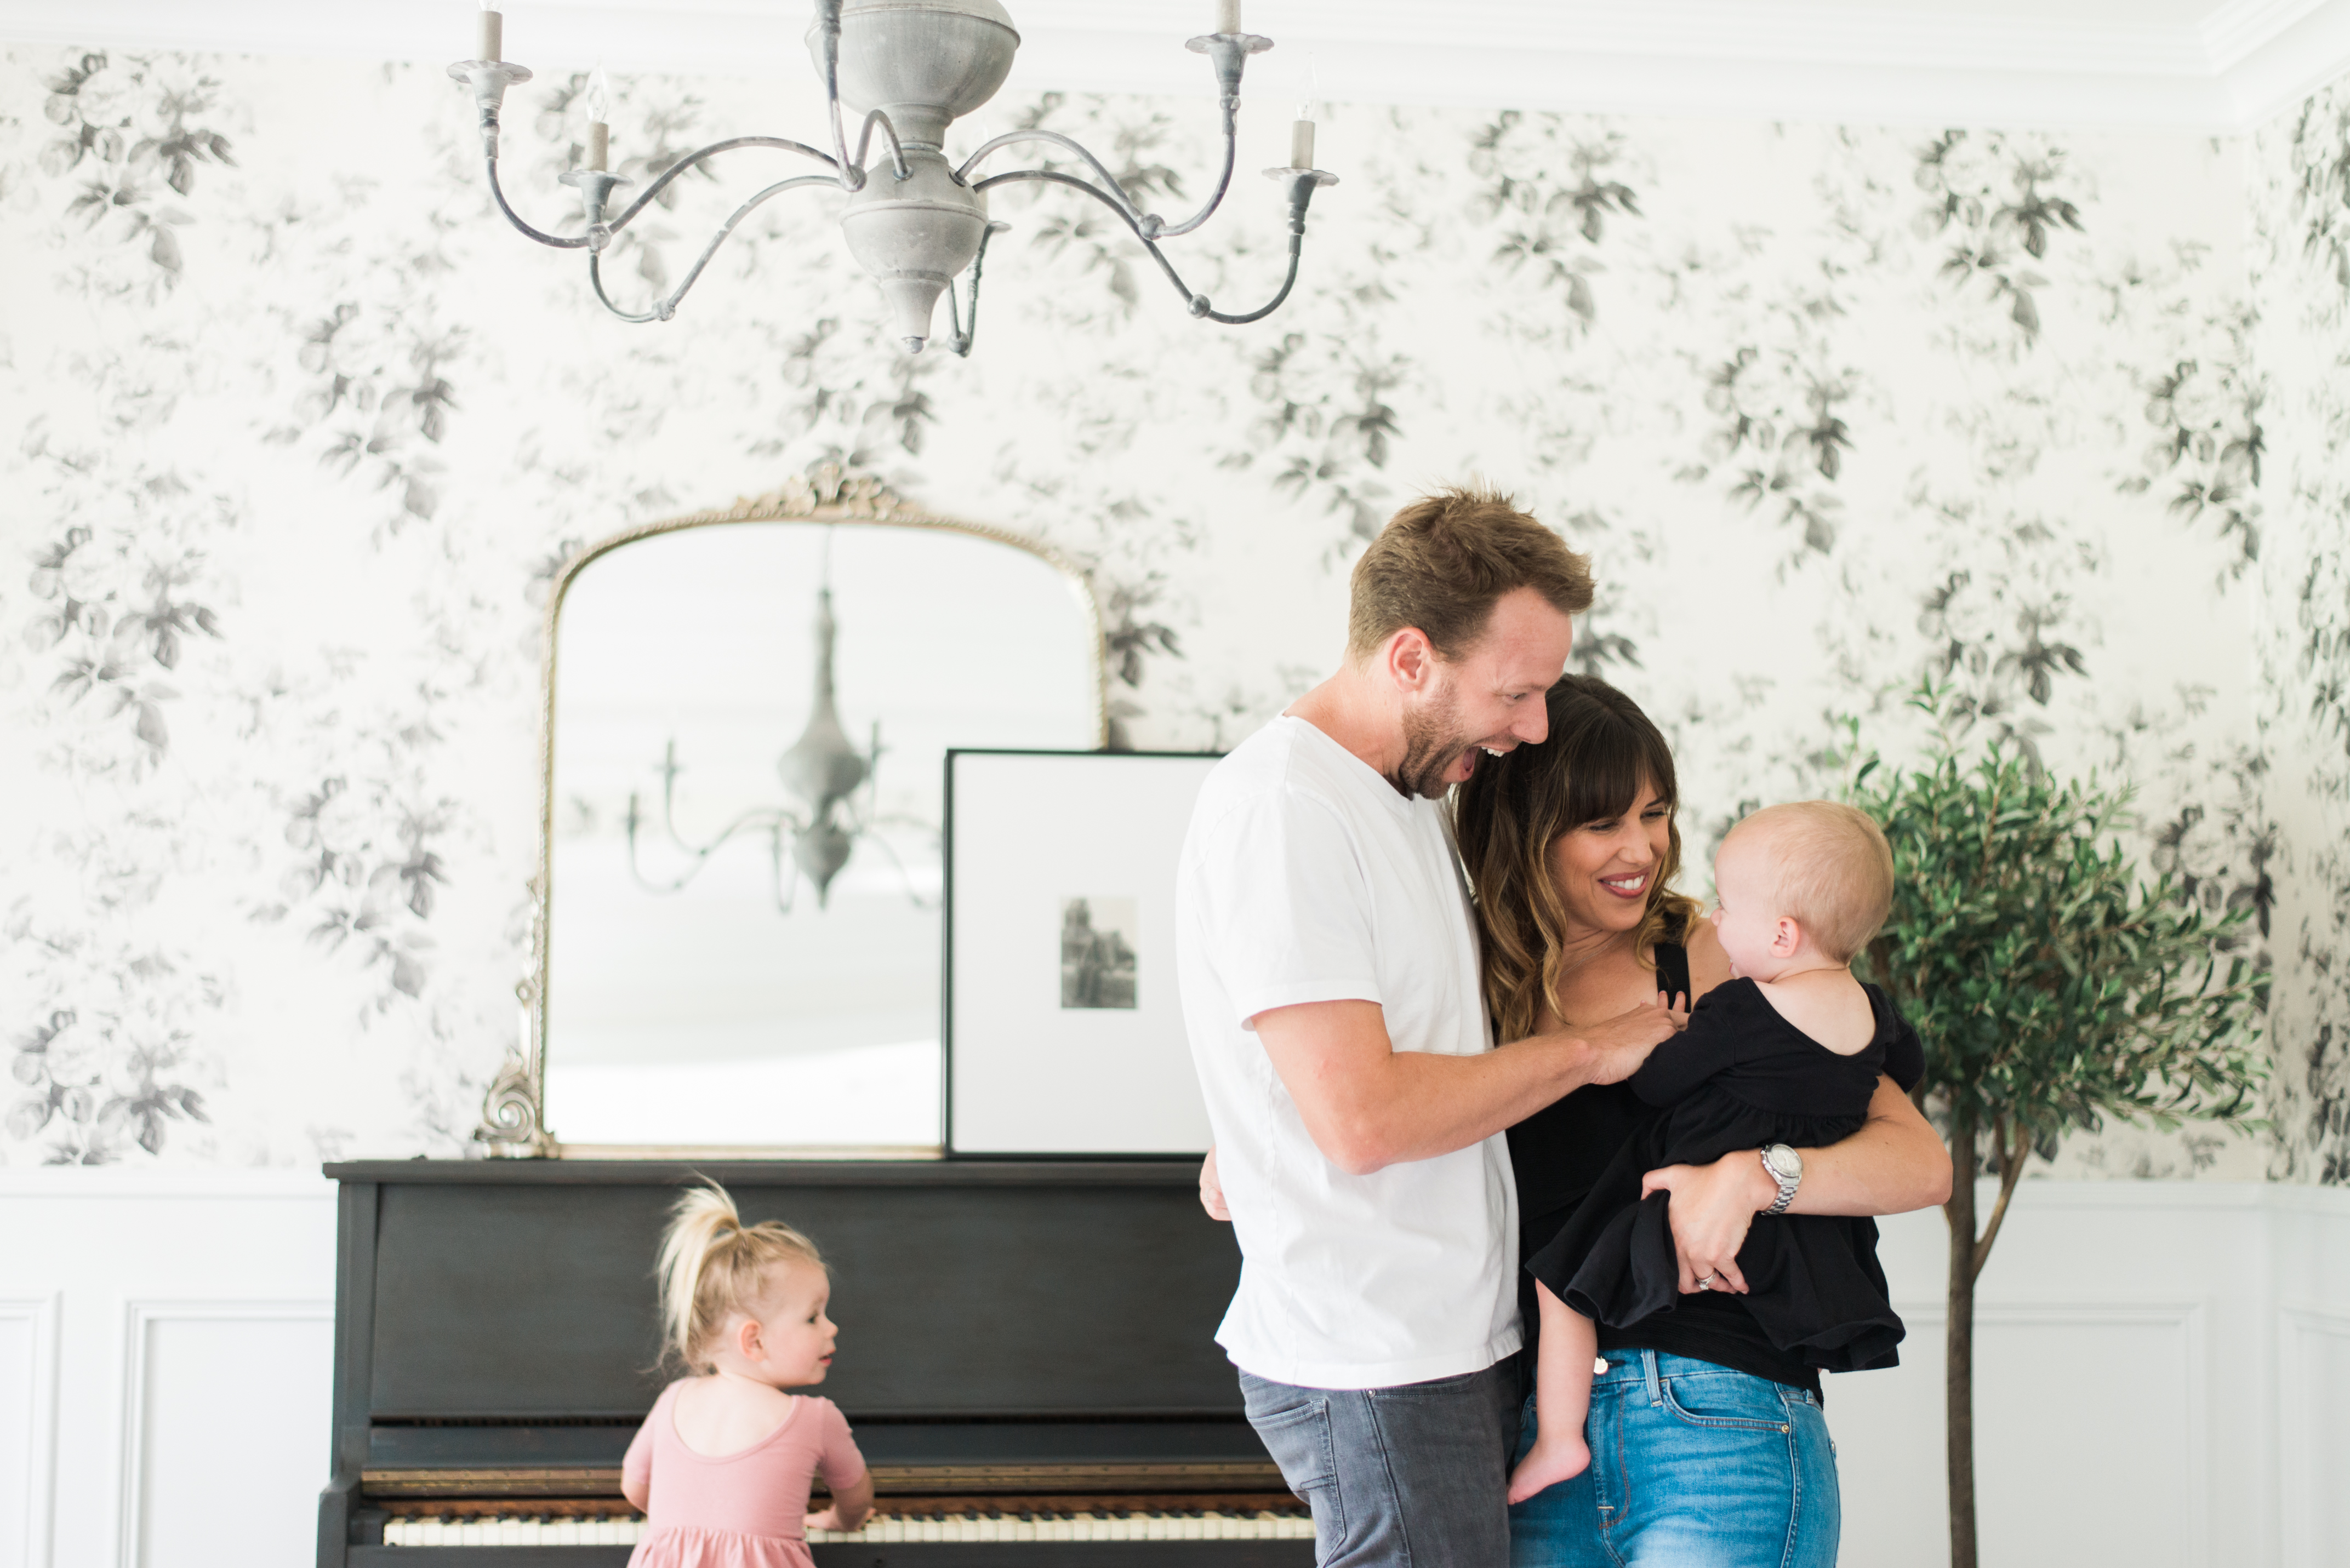 Bookmark this post ASAP! Lifestyle and Motherhood Blogger Meghan Basinger is sharing her gorgeous living room reveal.